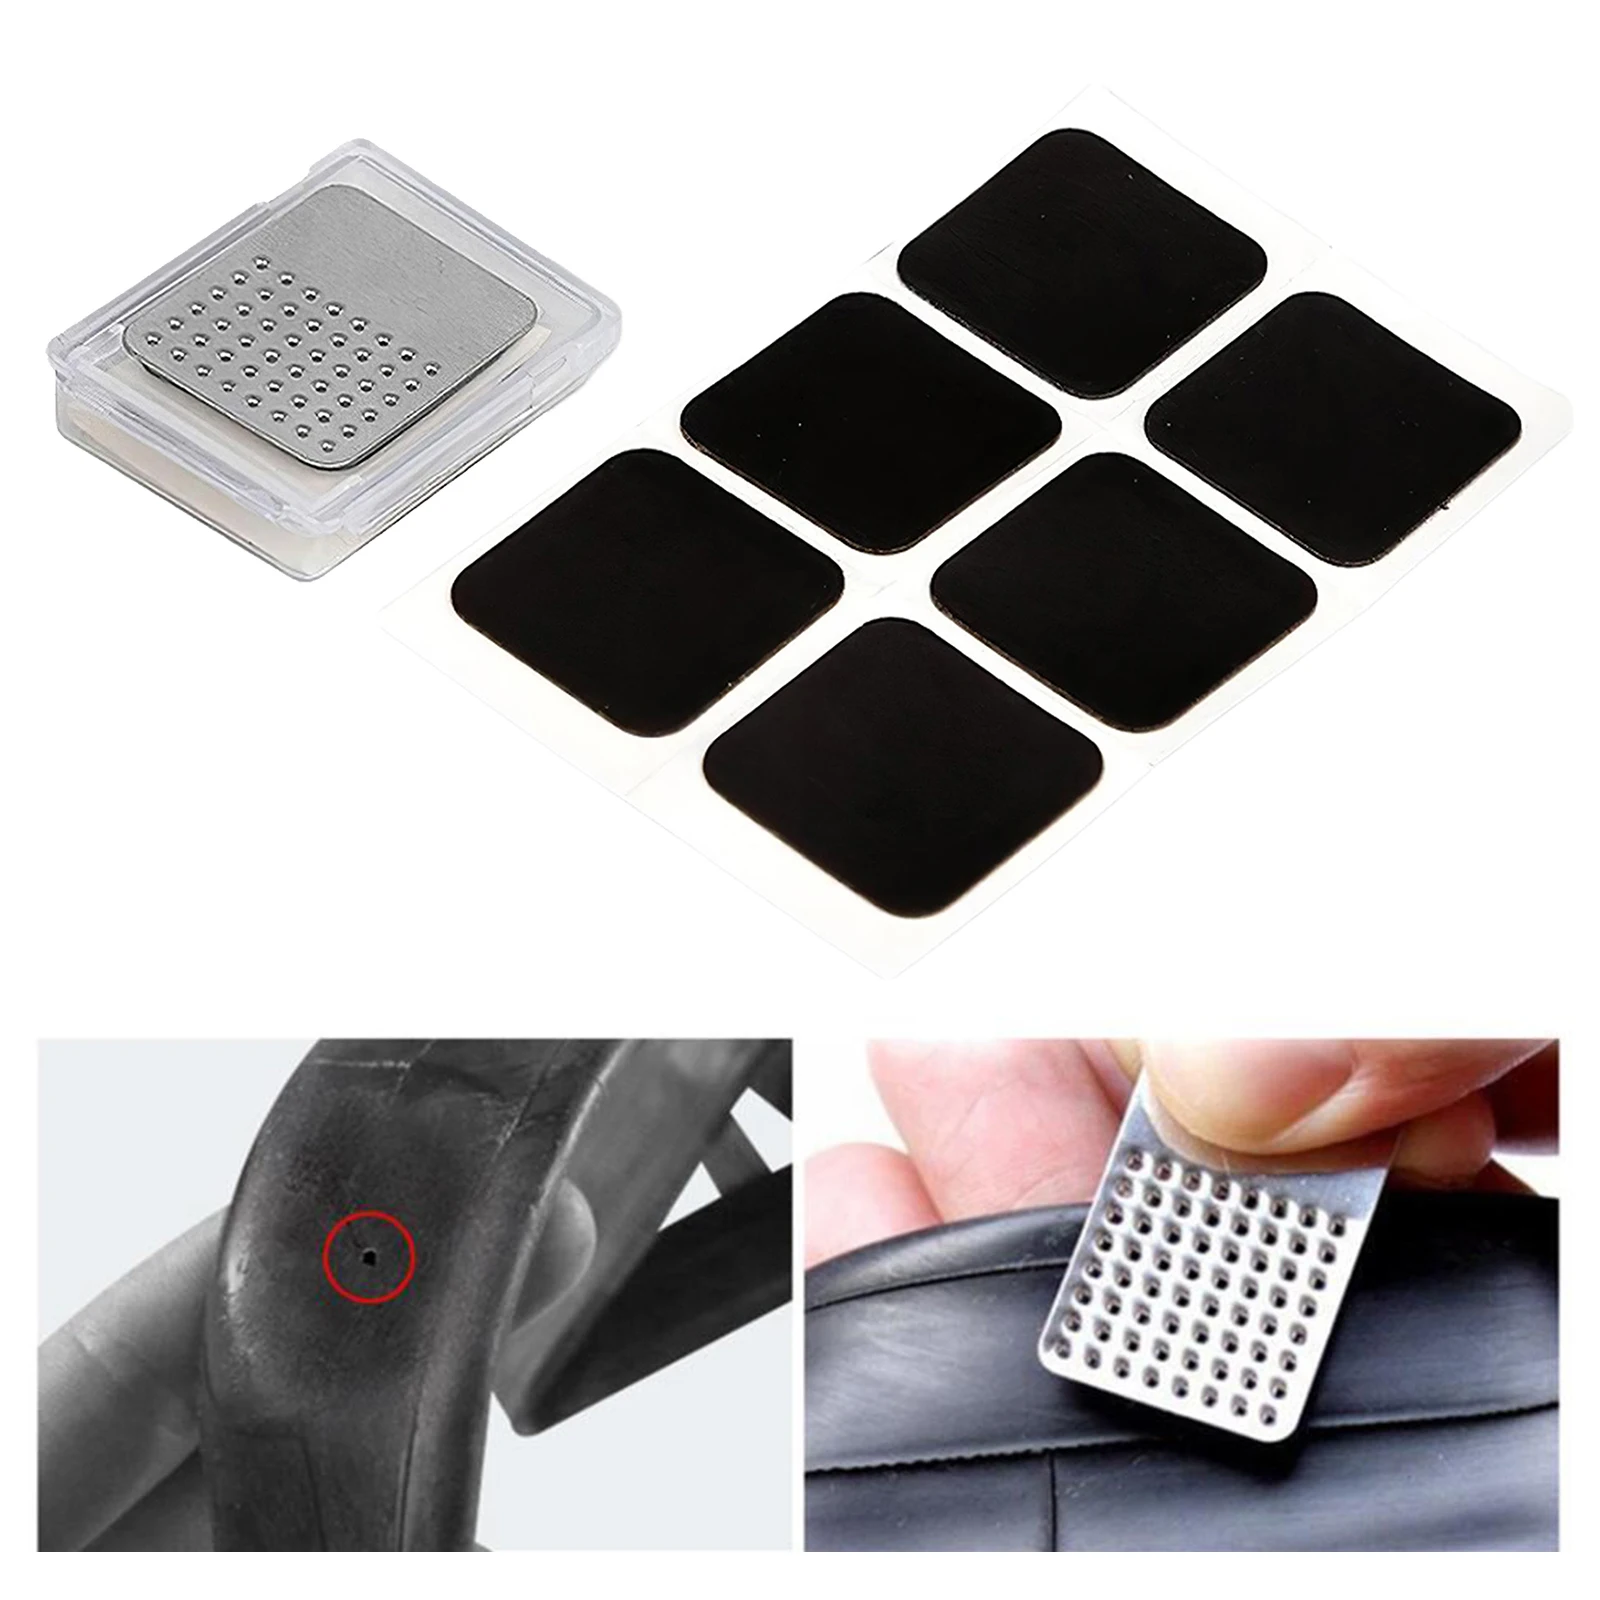 Round Rubber Patch Bicycle Bike Tire Tyre Puncture Repair Piece Patch Kits6 